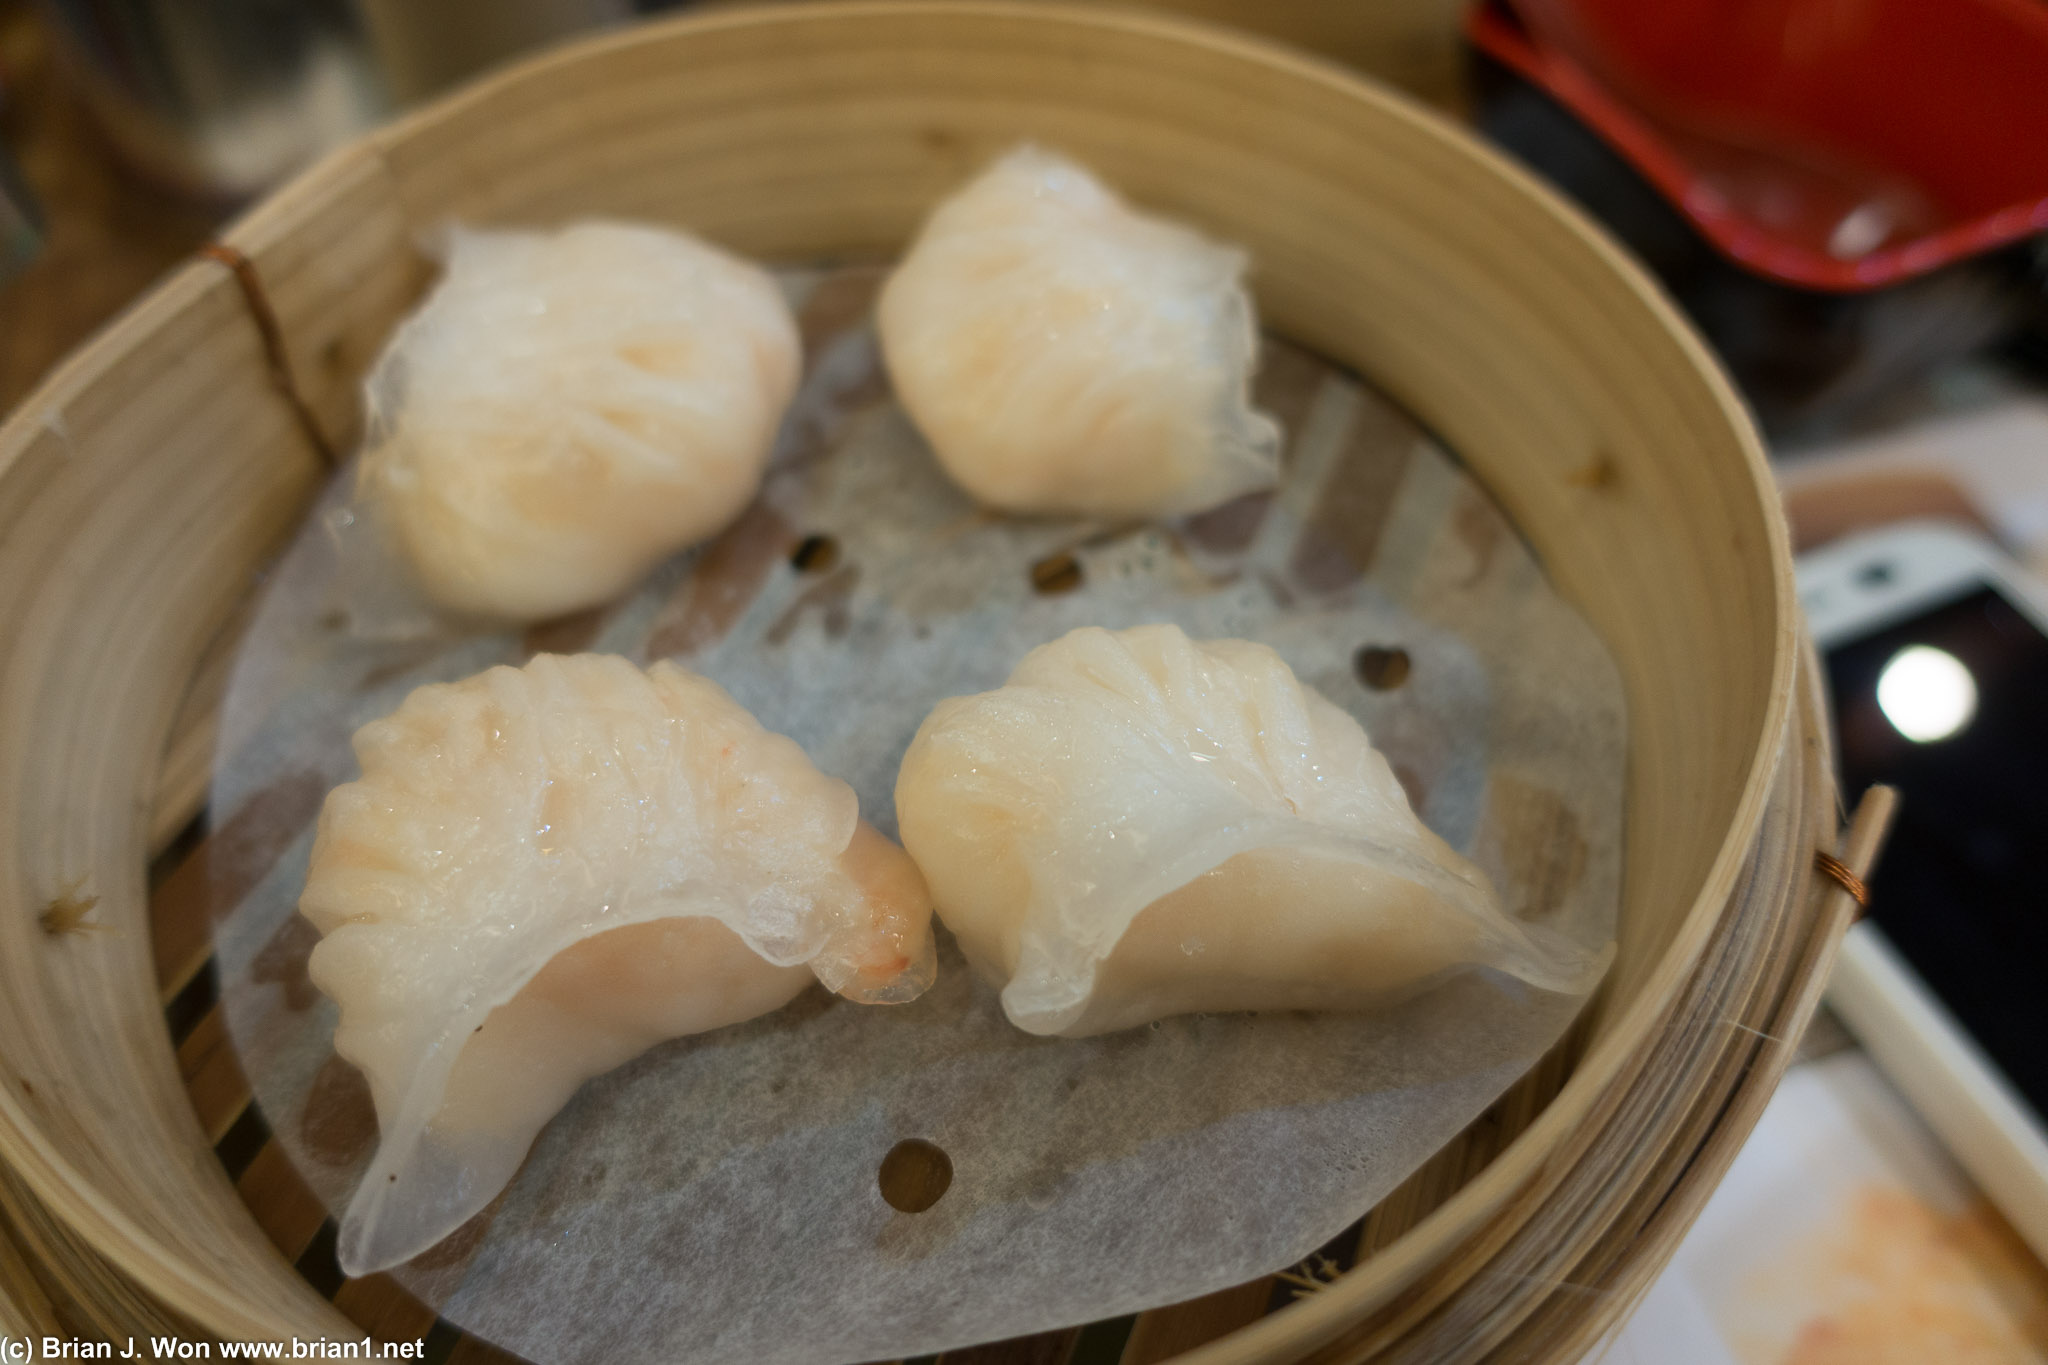 Har gow. Translucent skins, right number of folds, and tastes delicious.